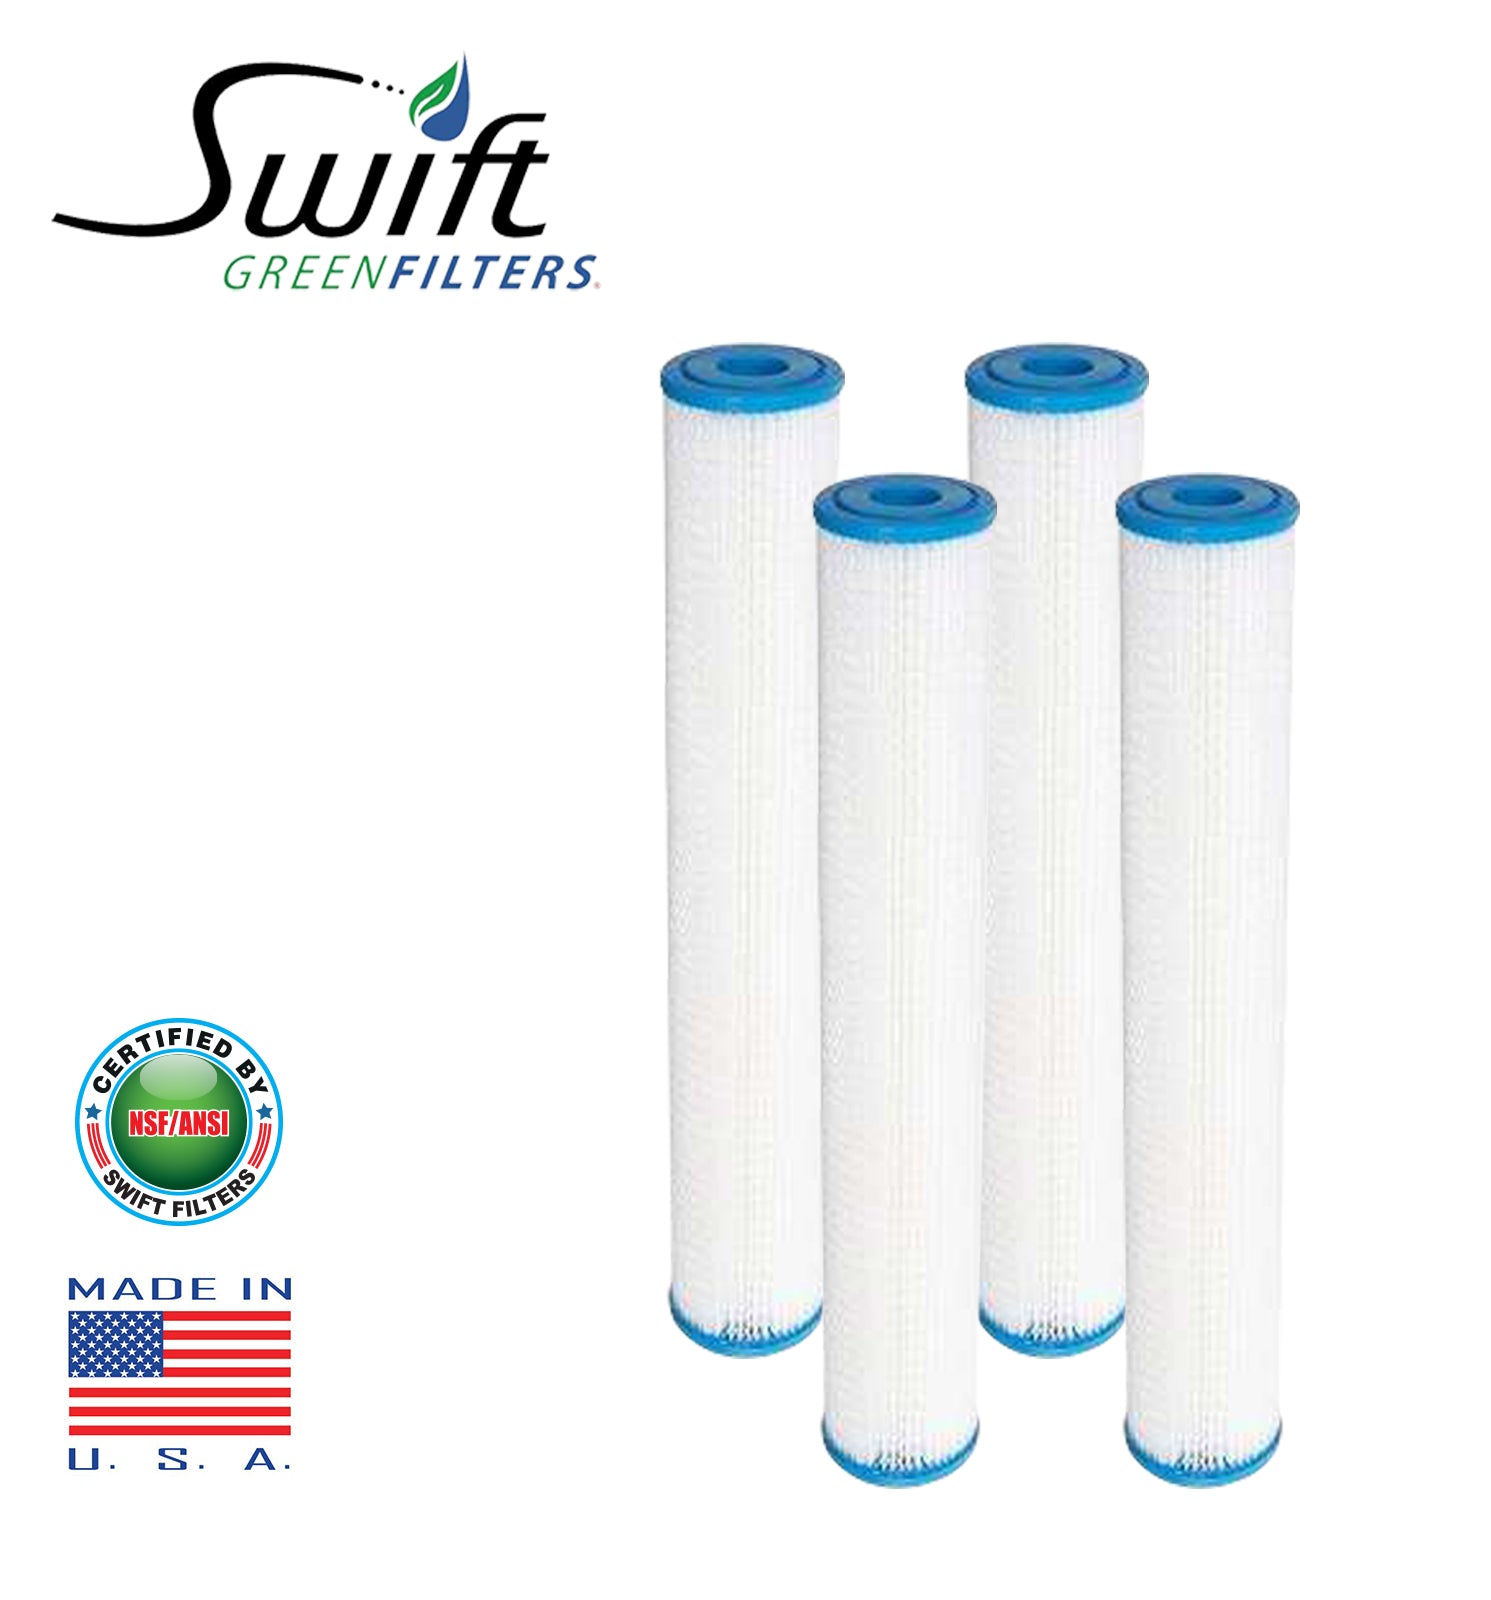 50 Micron Polyester Pleated Washable Sediment Water Filter 2.5" x 9 7/8" by Swift Green Filters